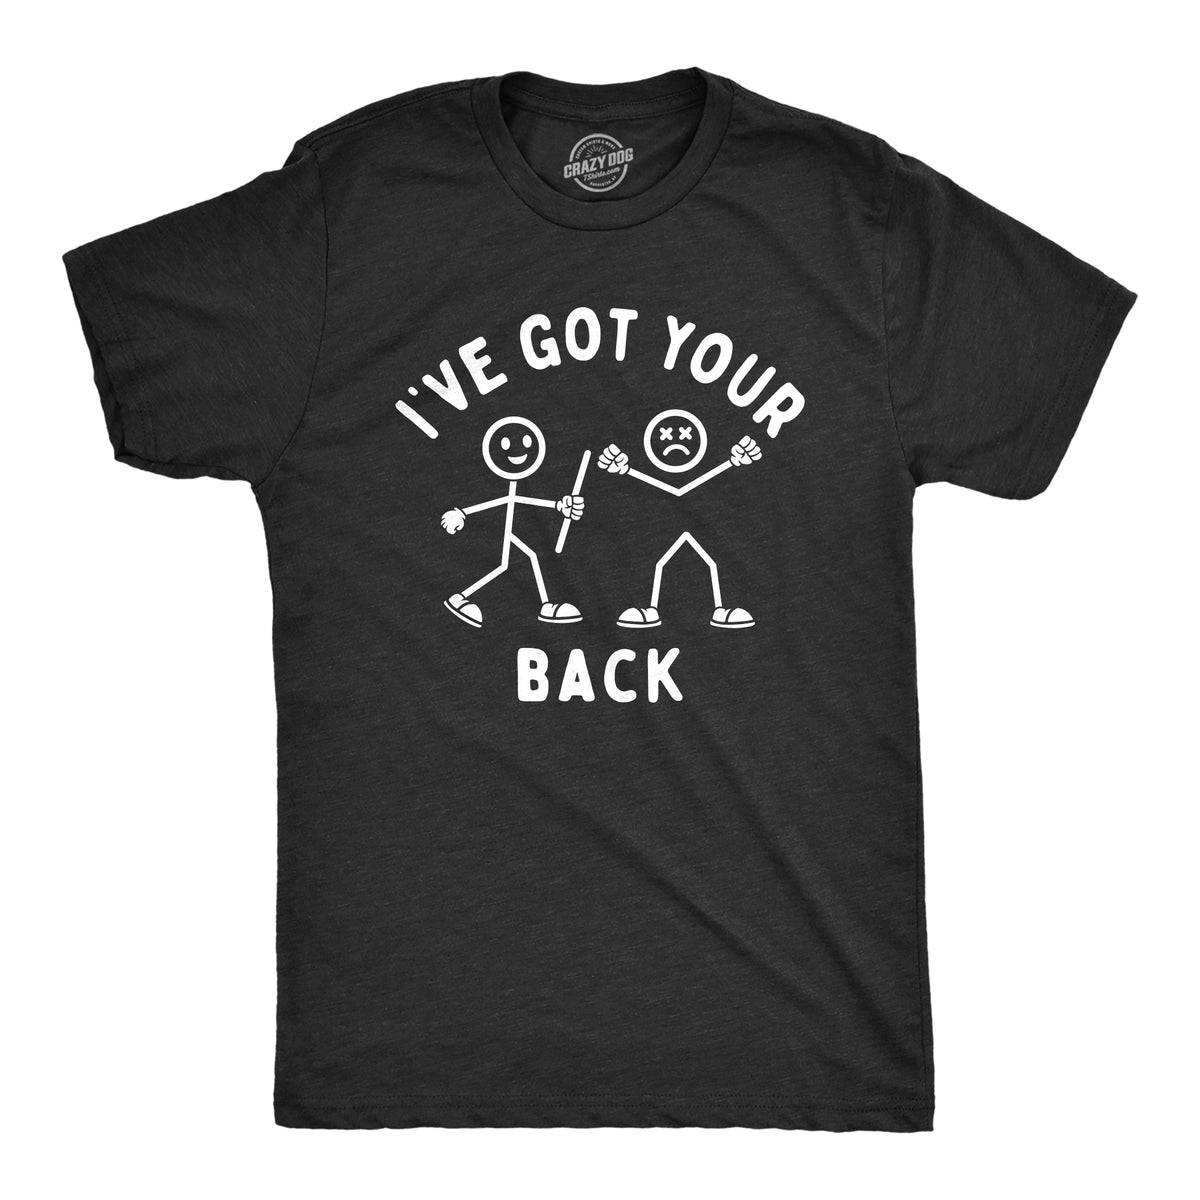 Funny Heather Black - BACK Ive Got Your Back Mens T Shirt Nerdy sarcastic Tee